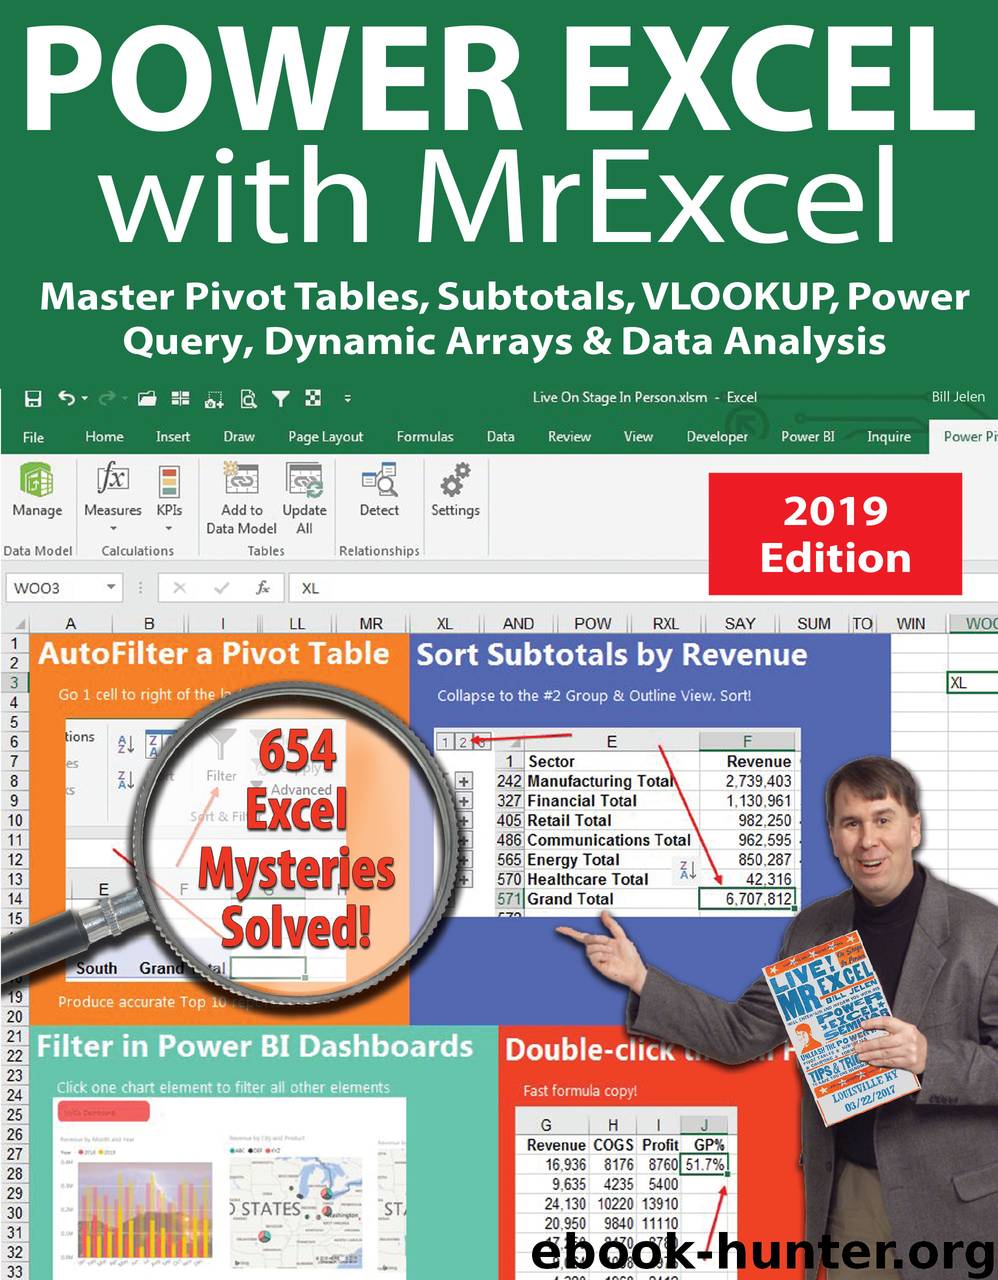 Power Excel 2019 with MrExcel by Jelen Bill;